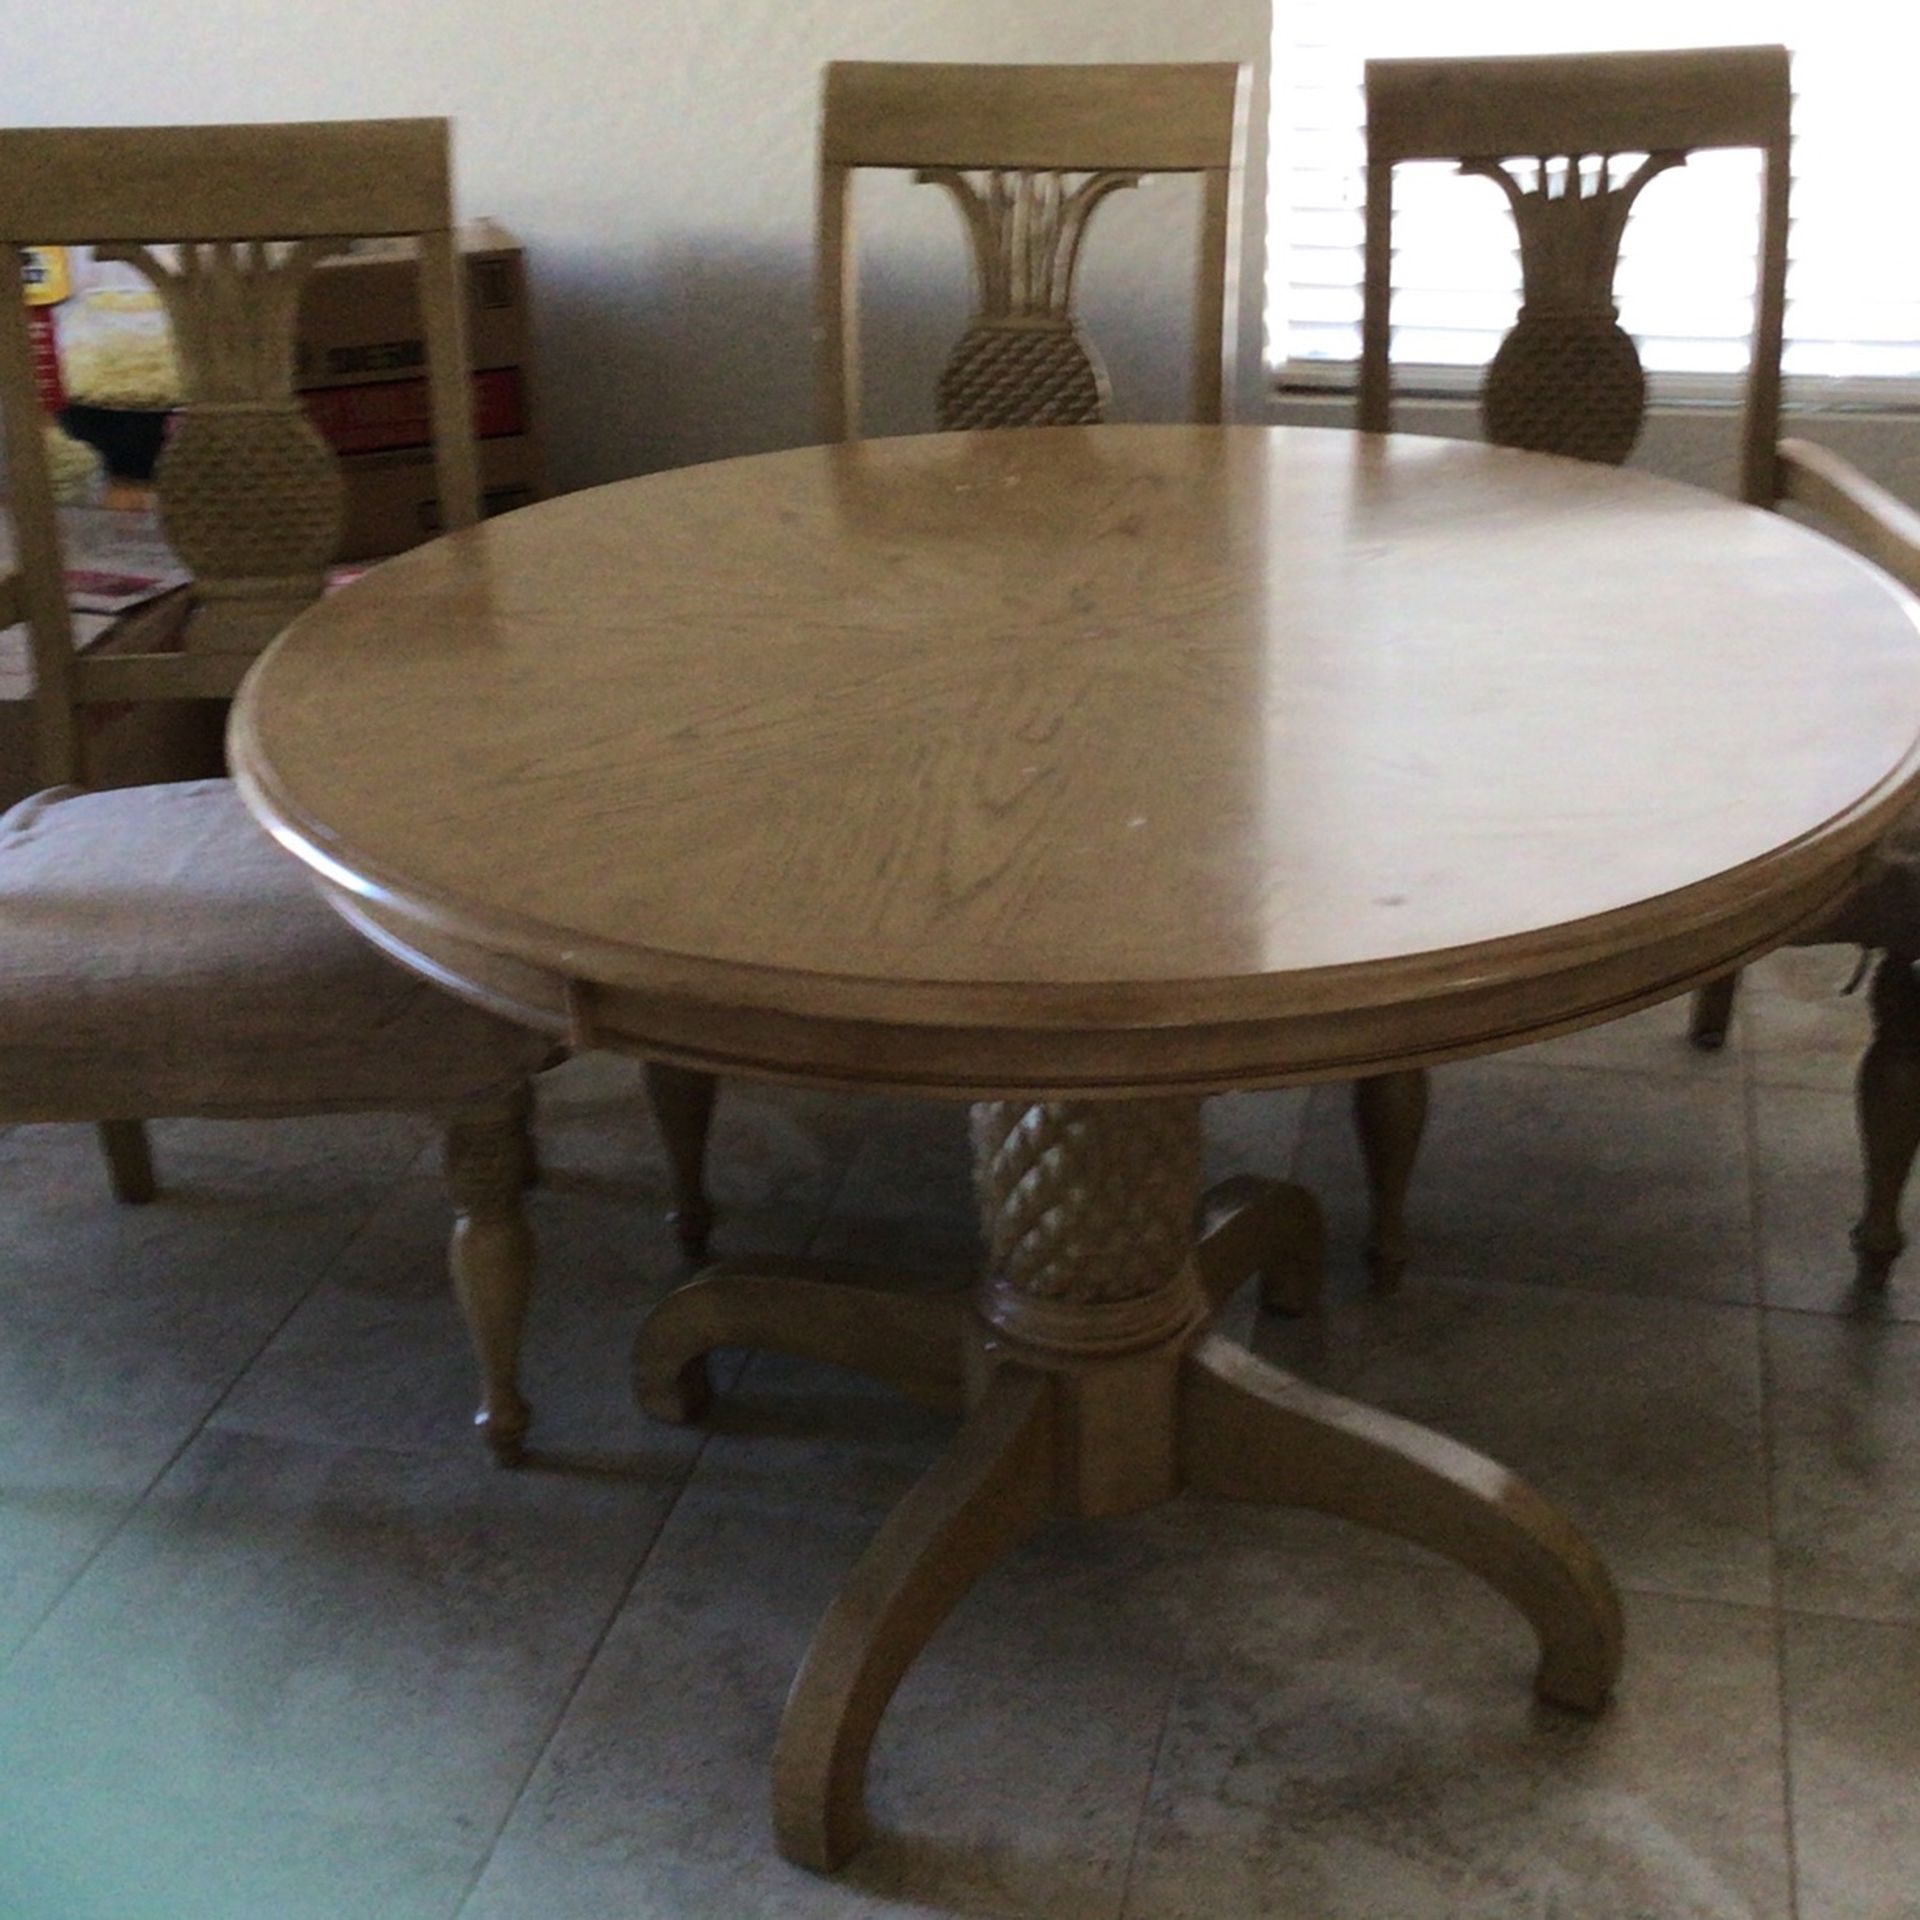 Pineapple kitchen table with four chairs wood Free